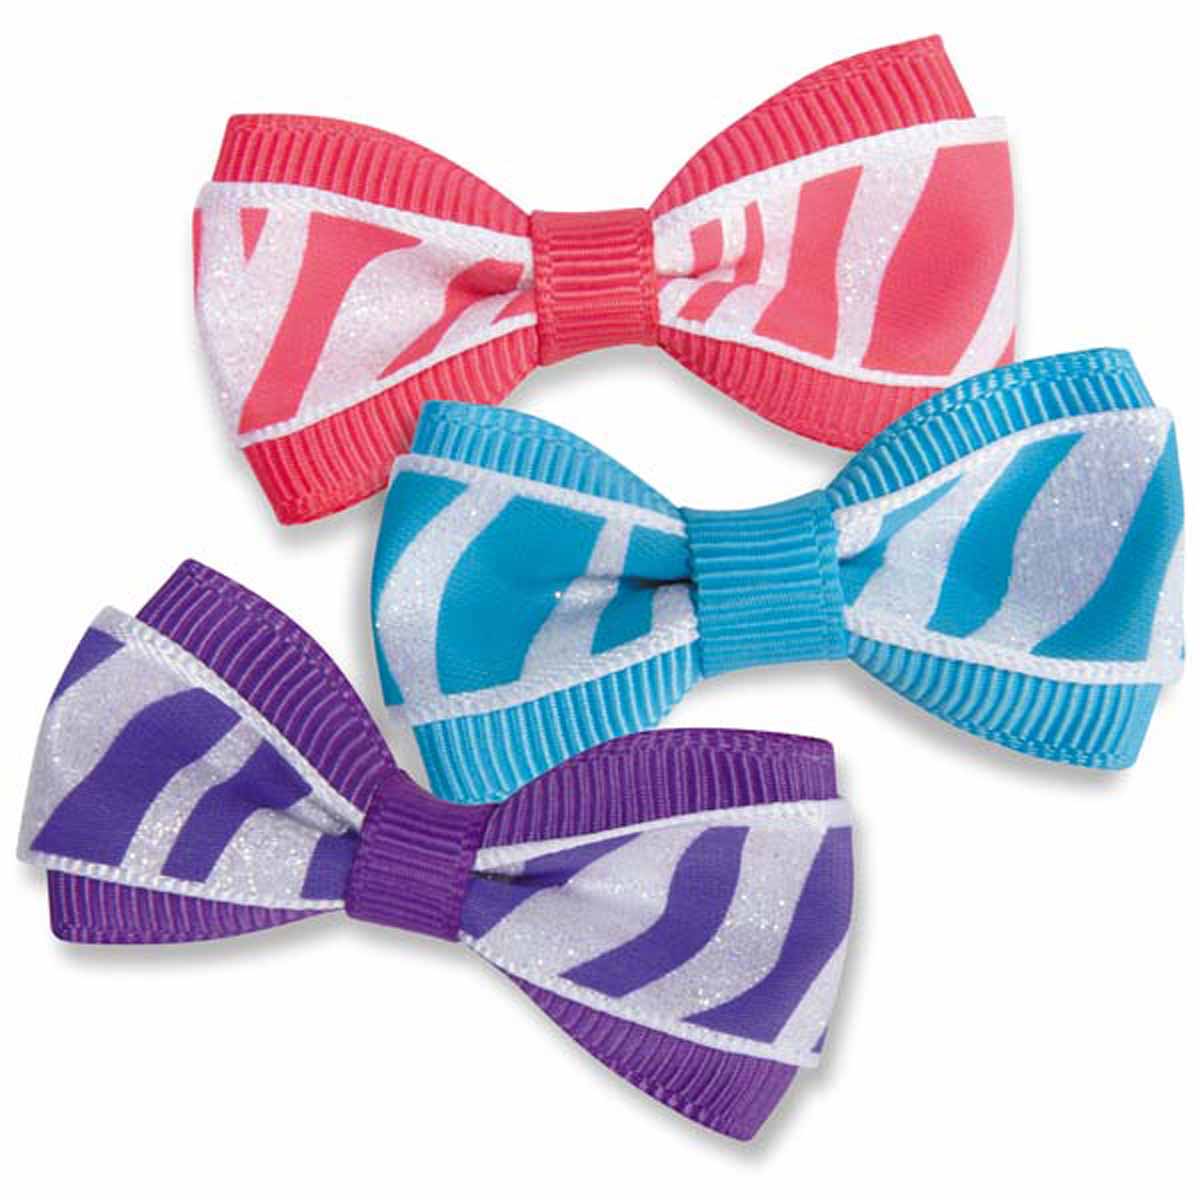 Dt9981 48 Portia Dog Bows - 6 Assorted Bows